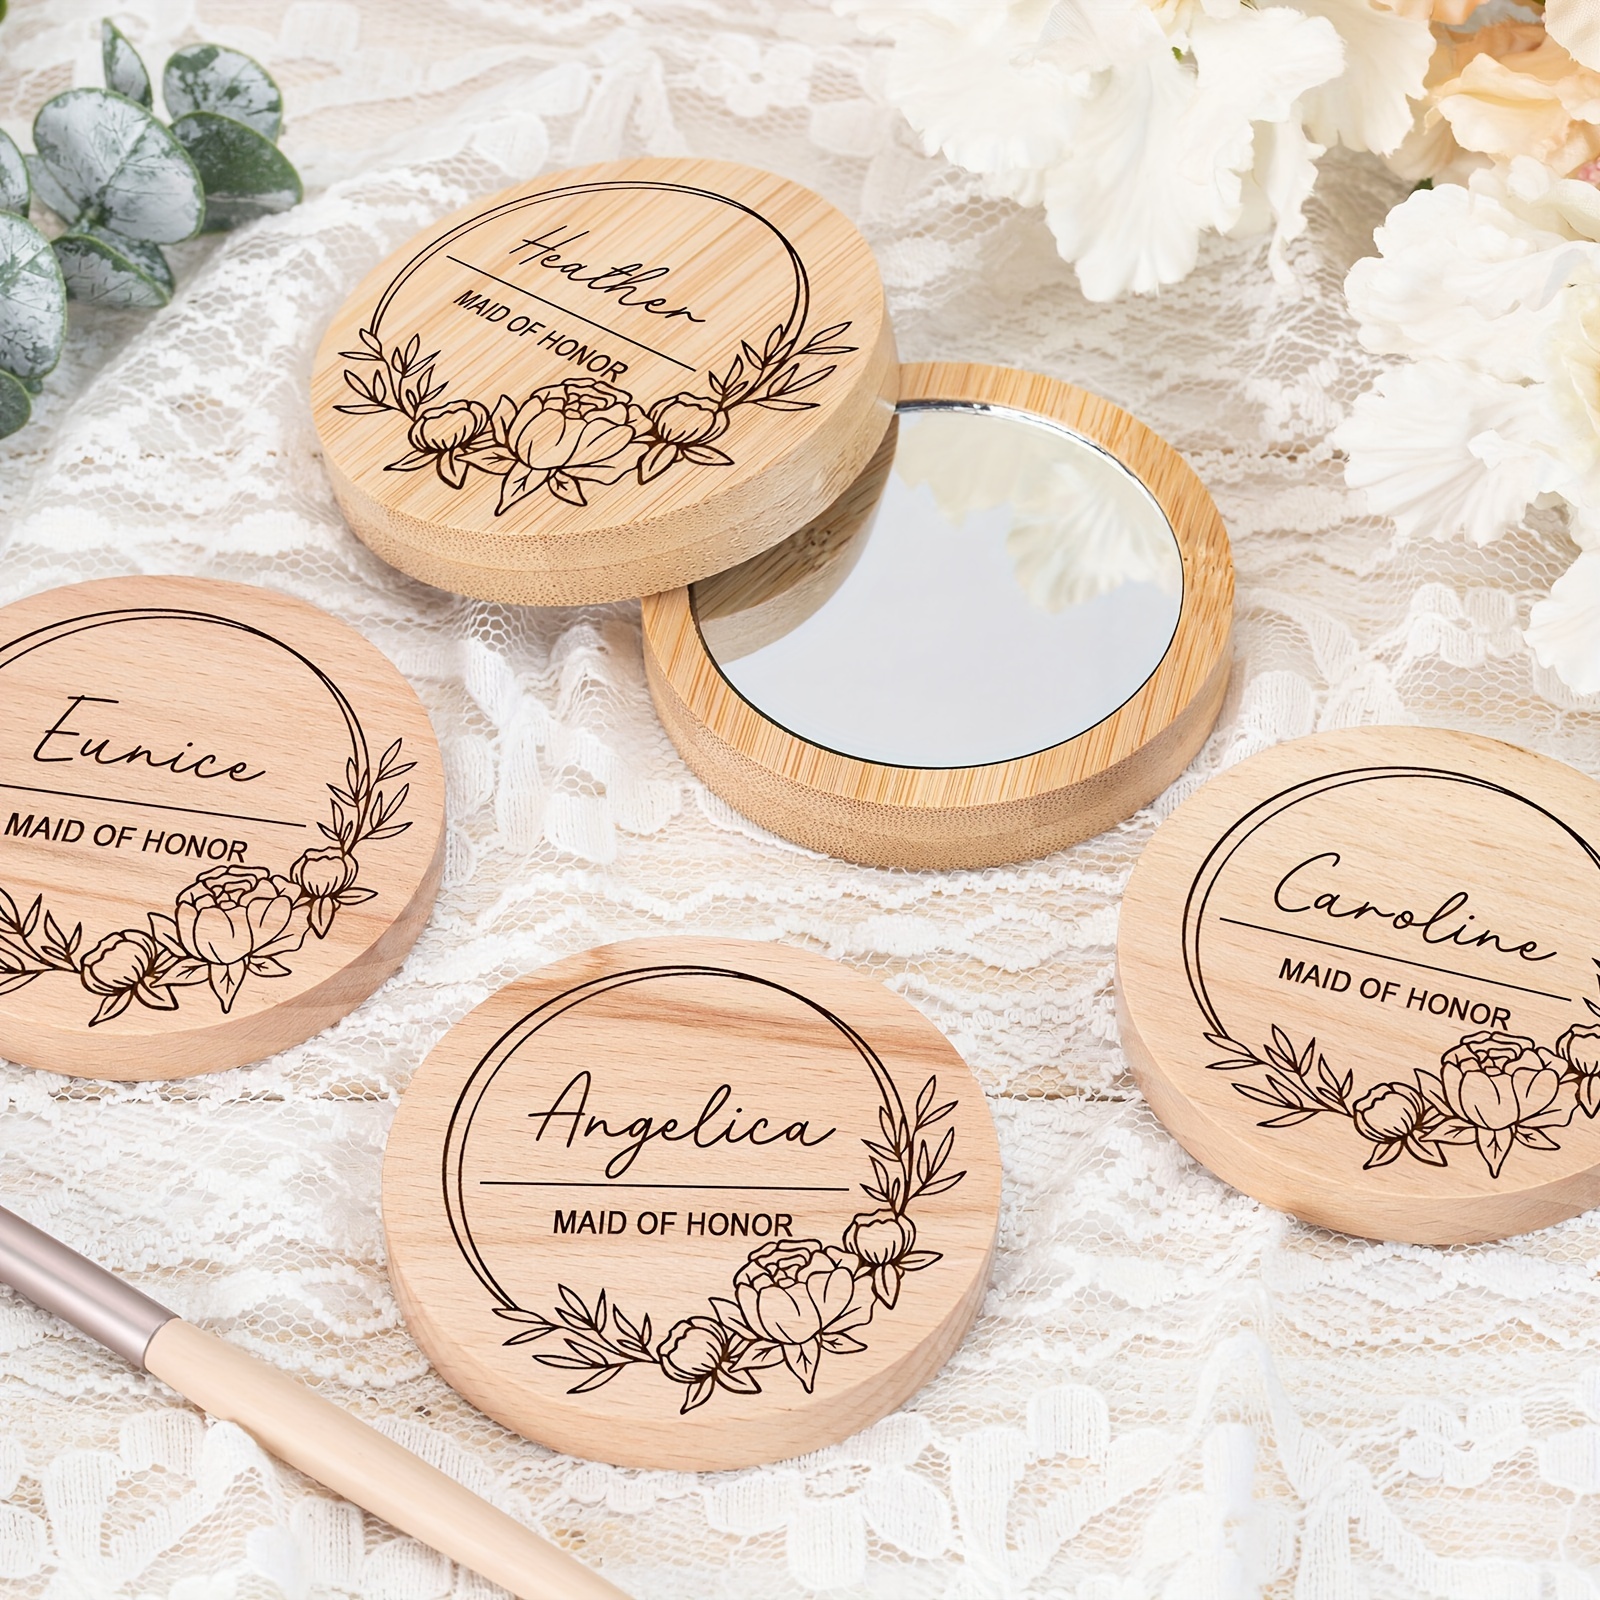 

1pc, Bridesmaid Gifts, Personalised Wooden Compact Mirrors, Pocket Mirrors, Bridesmaid Gifts, Custom Wedding Round Wooden Mirrors, Bridesmaid Proposals, Valentine's Day Gifts, Weird Stuff, Cheap Stuff